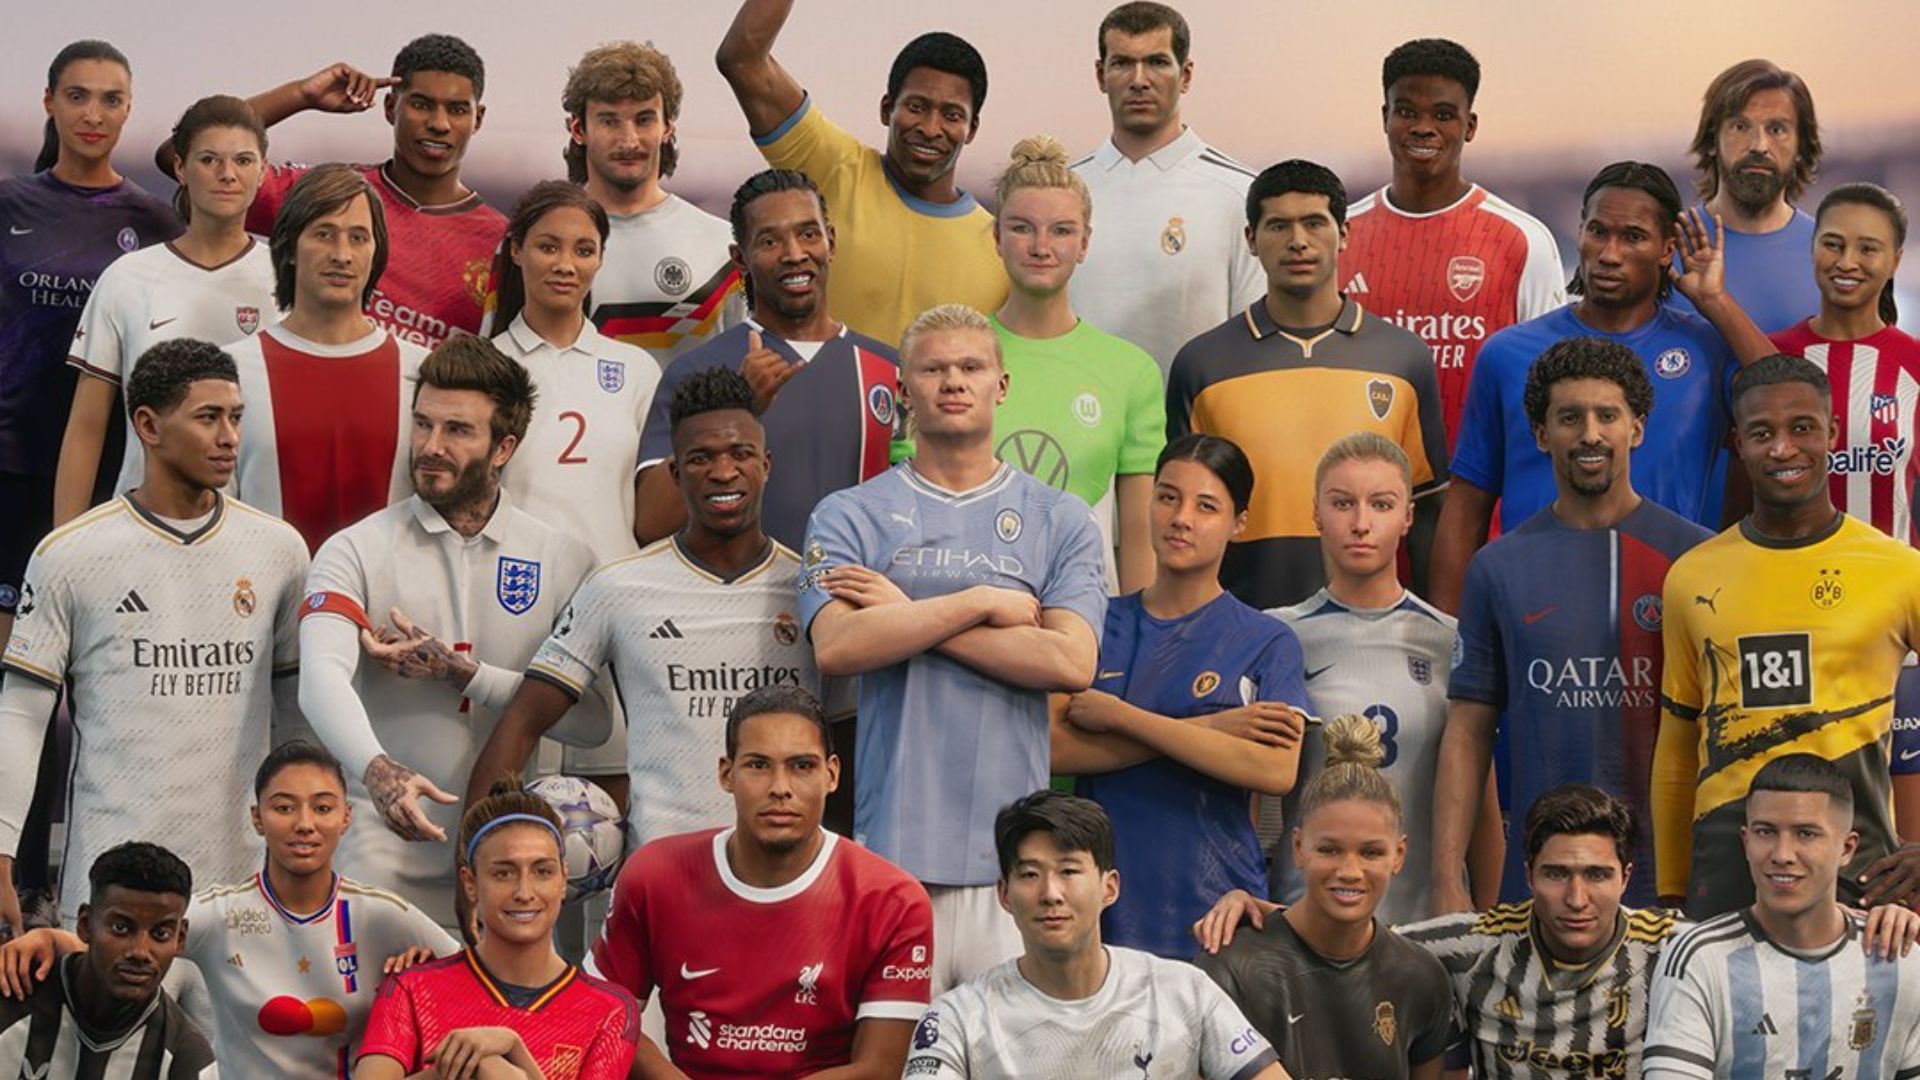 EA FC 24 - First 8 ICONs Revealed - Esports Illustrated